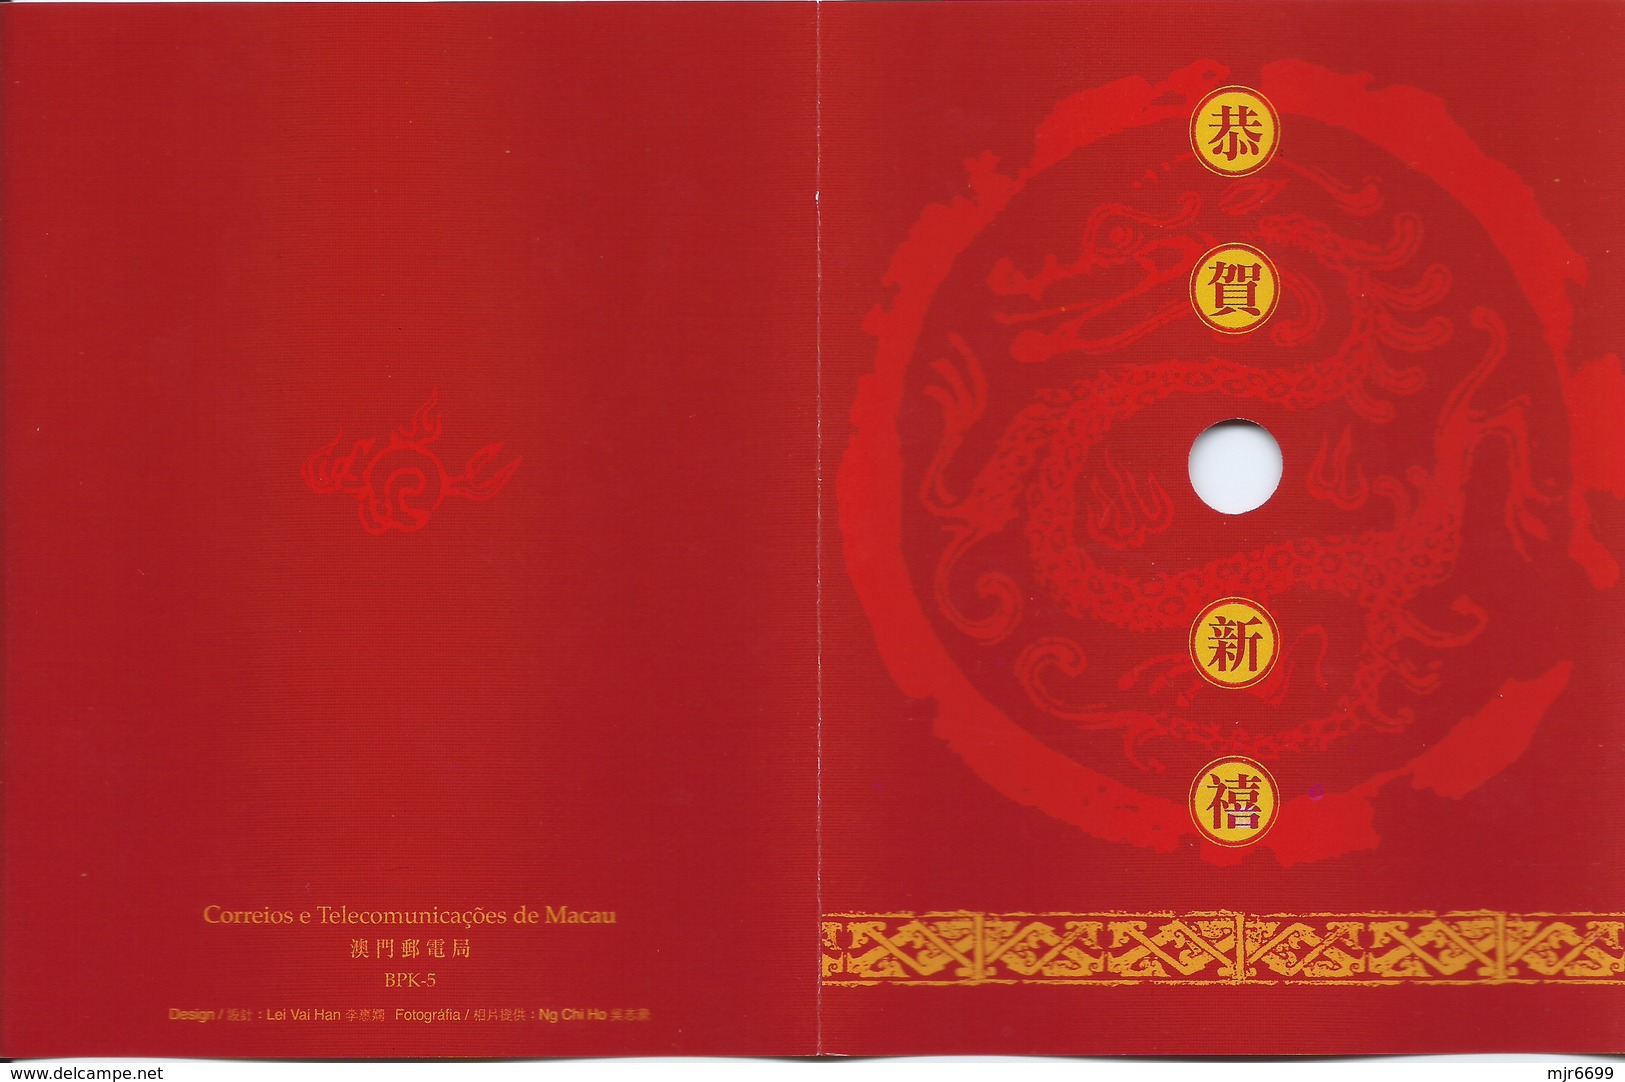 MACAU 1999 NEW YEAR GREETING CARD & POSTAGE PAID COVERLOCAL USAGE, POST OFFICE CODE #BPK005 - Enteros Postales